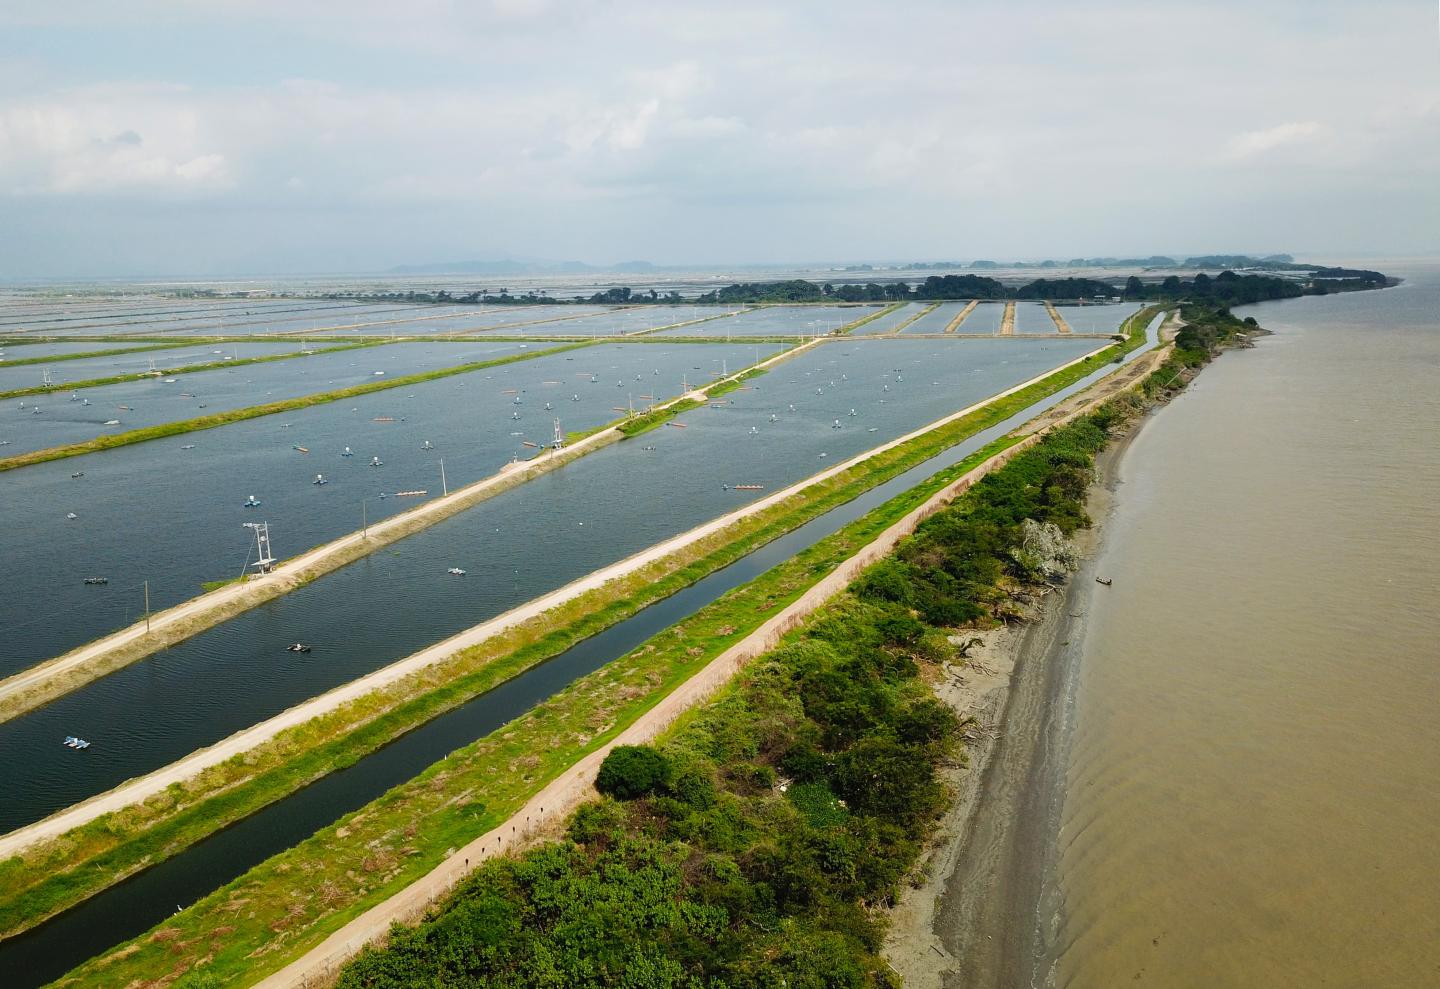 An aerial shot showing the divide in the river near Isla Santay and the shrimp ponds